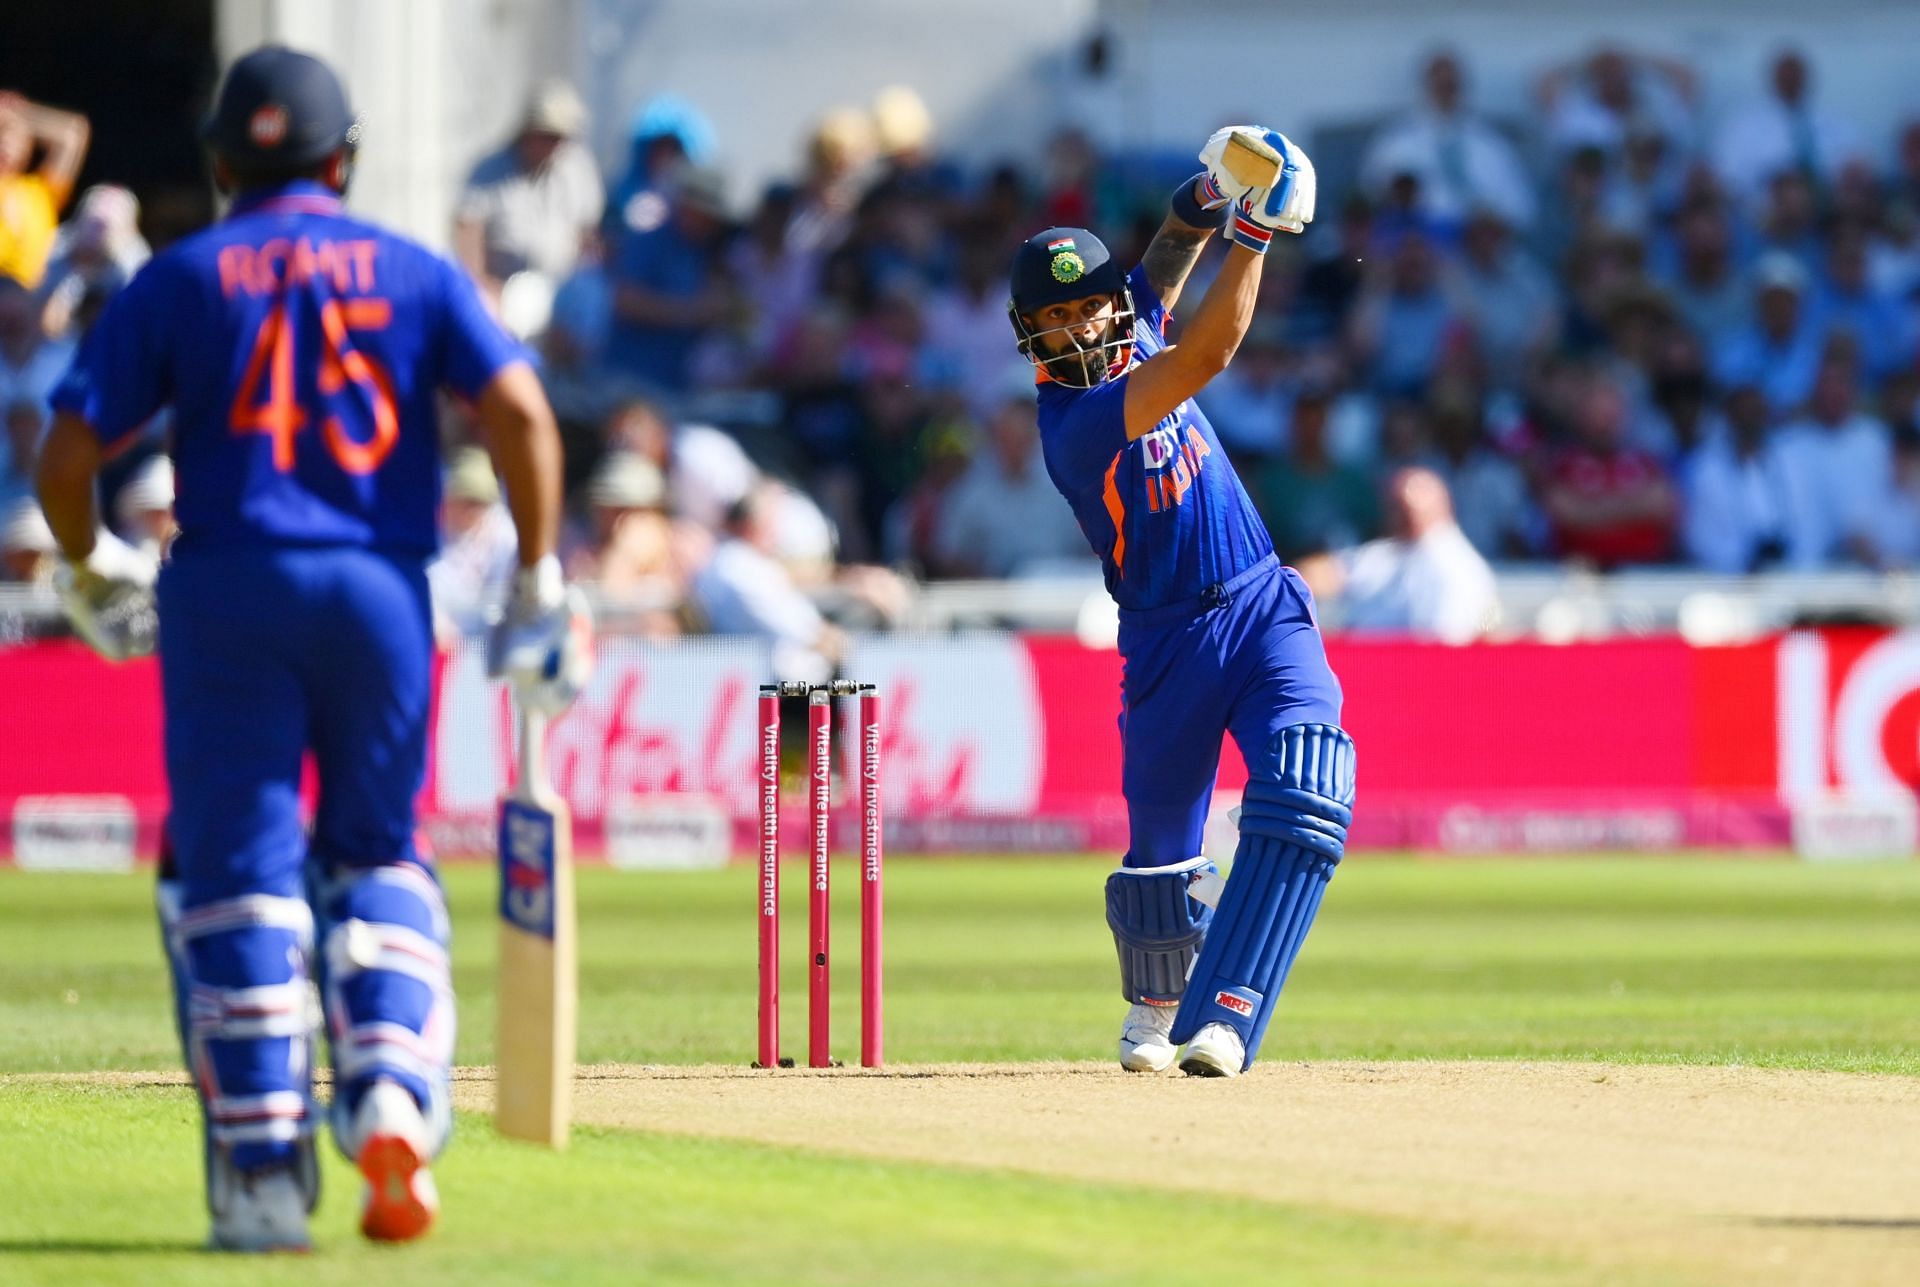 Virat Kohli batting during the recent tour of England. Pic: Getty Images